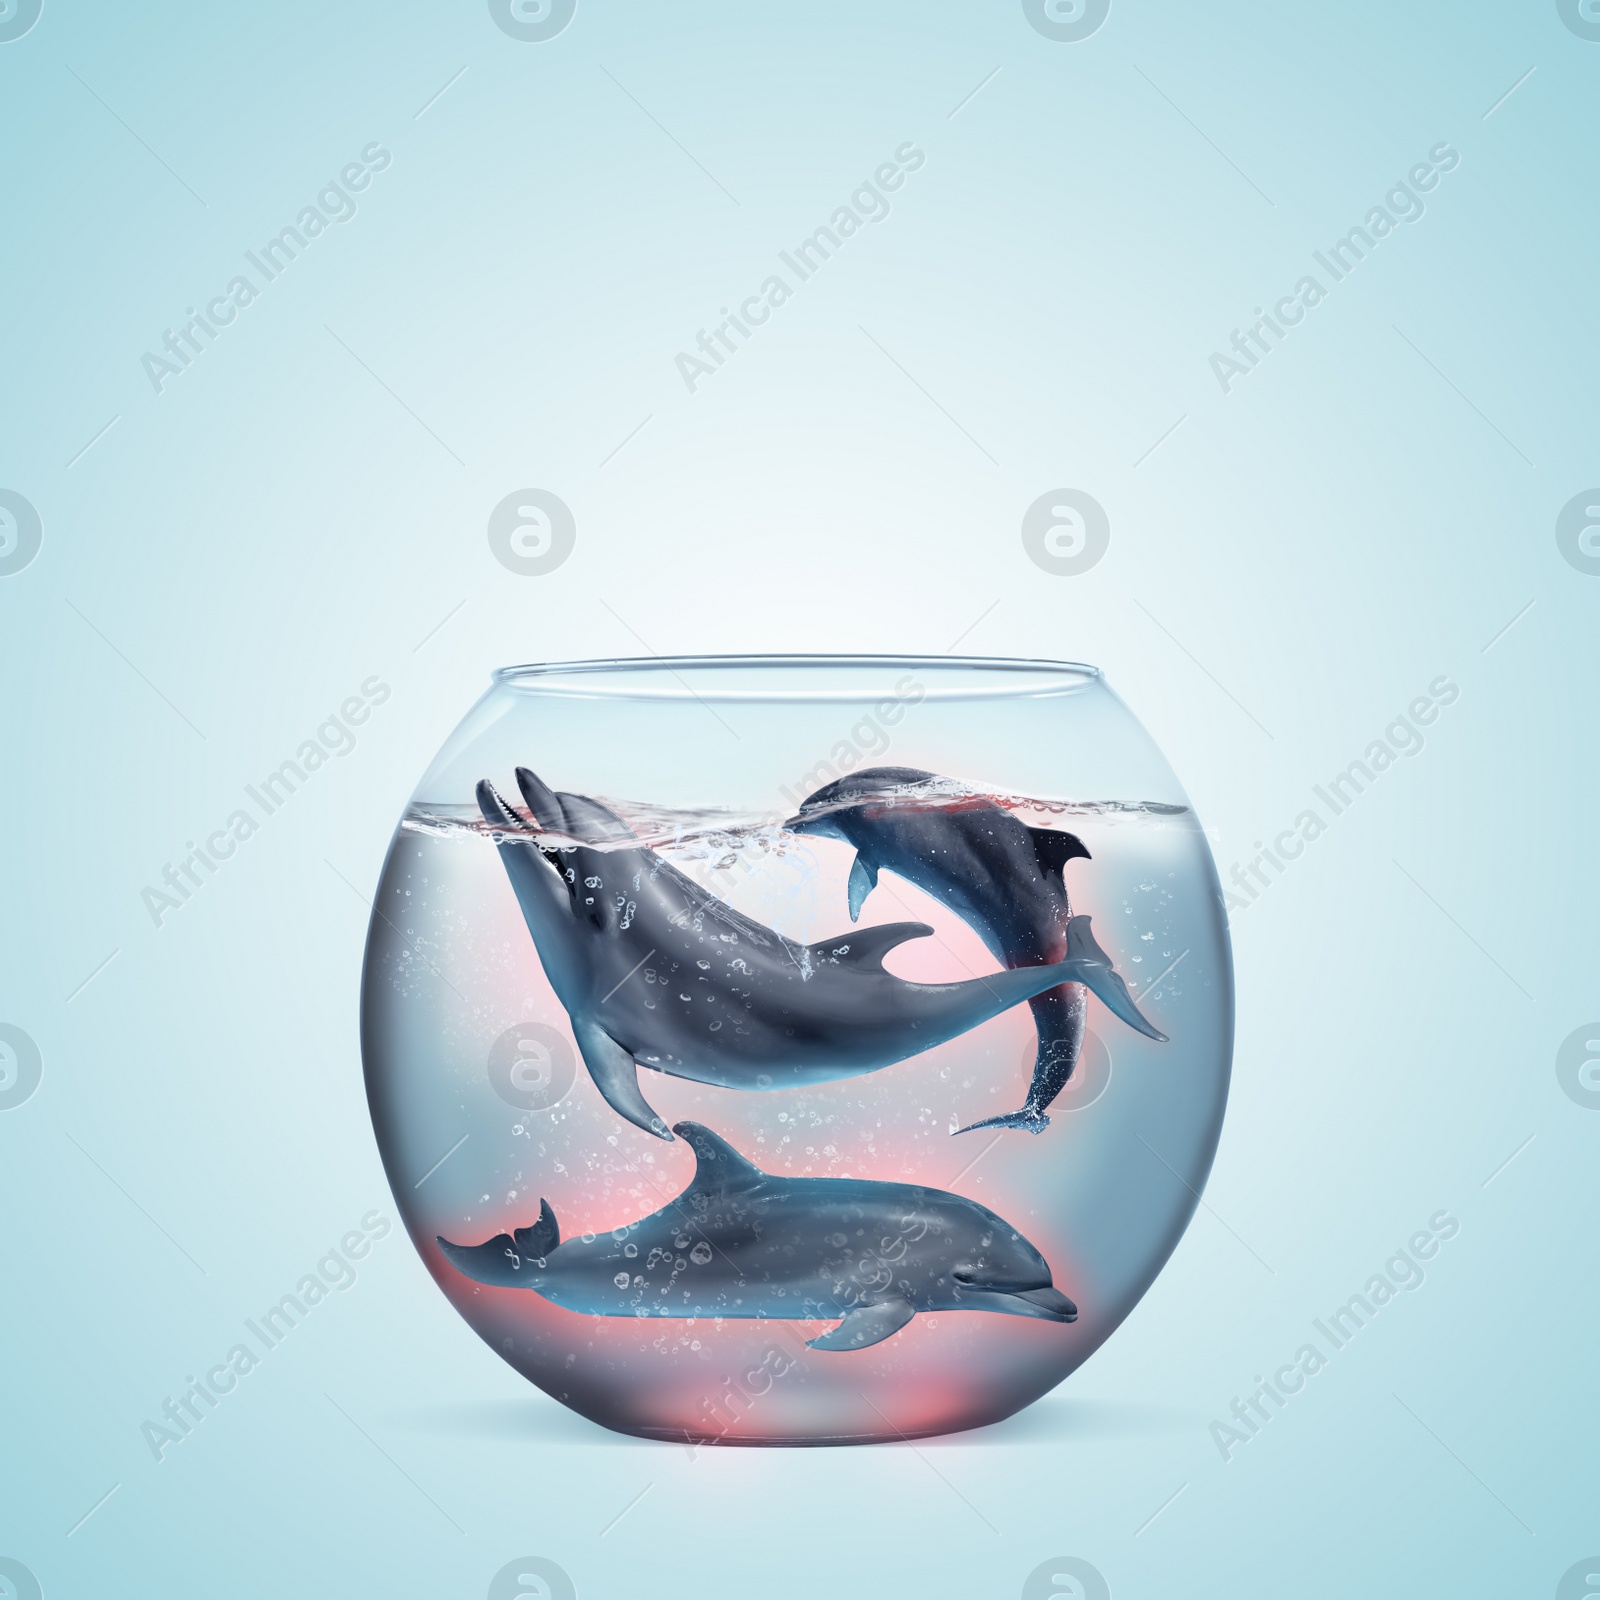 Image of Dolphins in glass aquarium on light blue background. Anti-Captivity Campaign